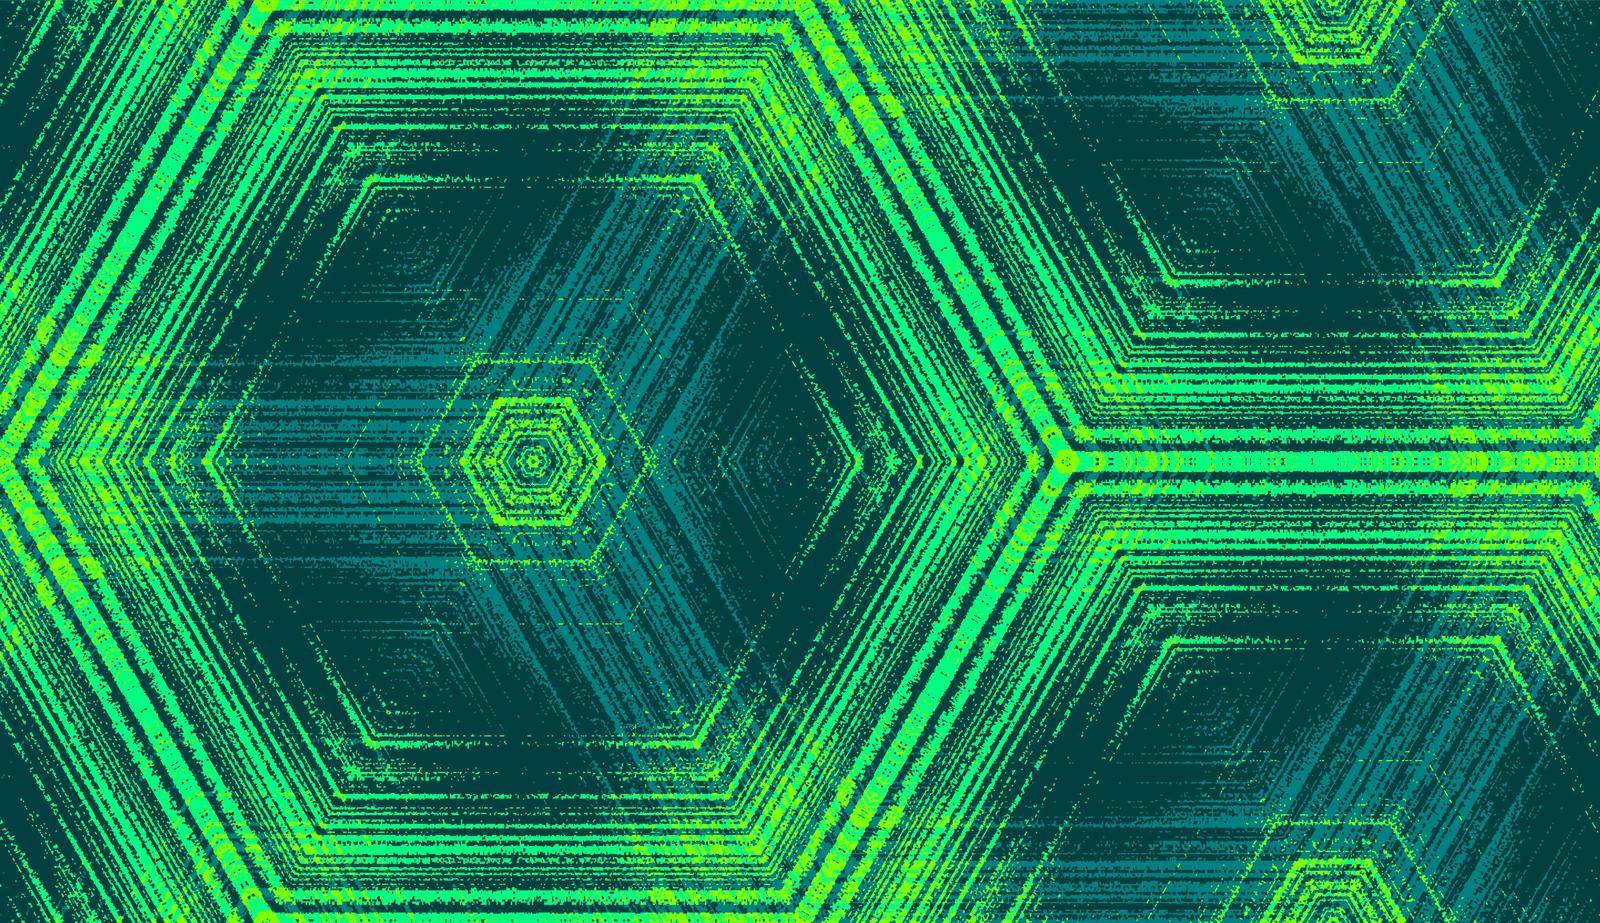 Symmetric abstract geometric ornament for wallpaper background design, textile printing, wrapping. Seamless hexagon concentric textured pattern in emerald, teal, lime green colors.